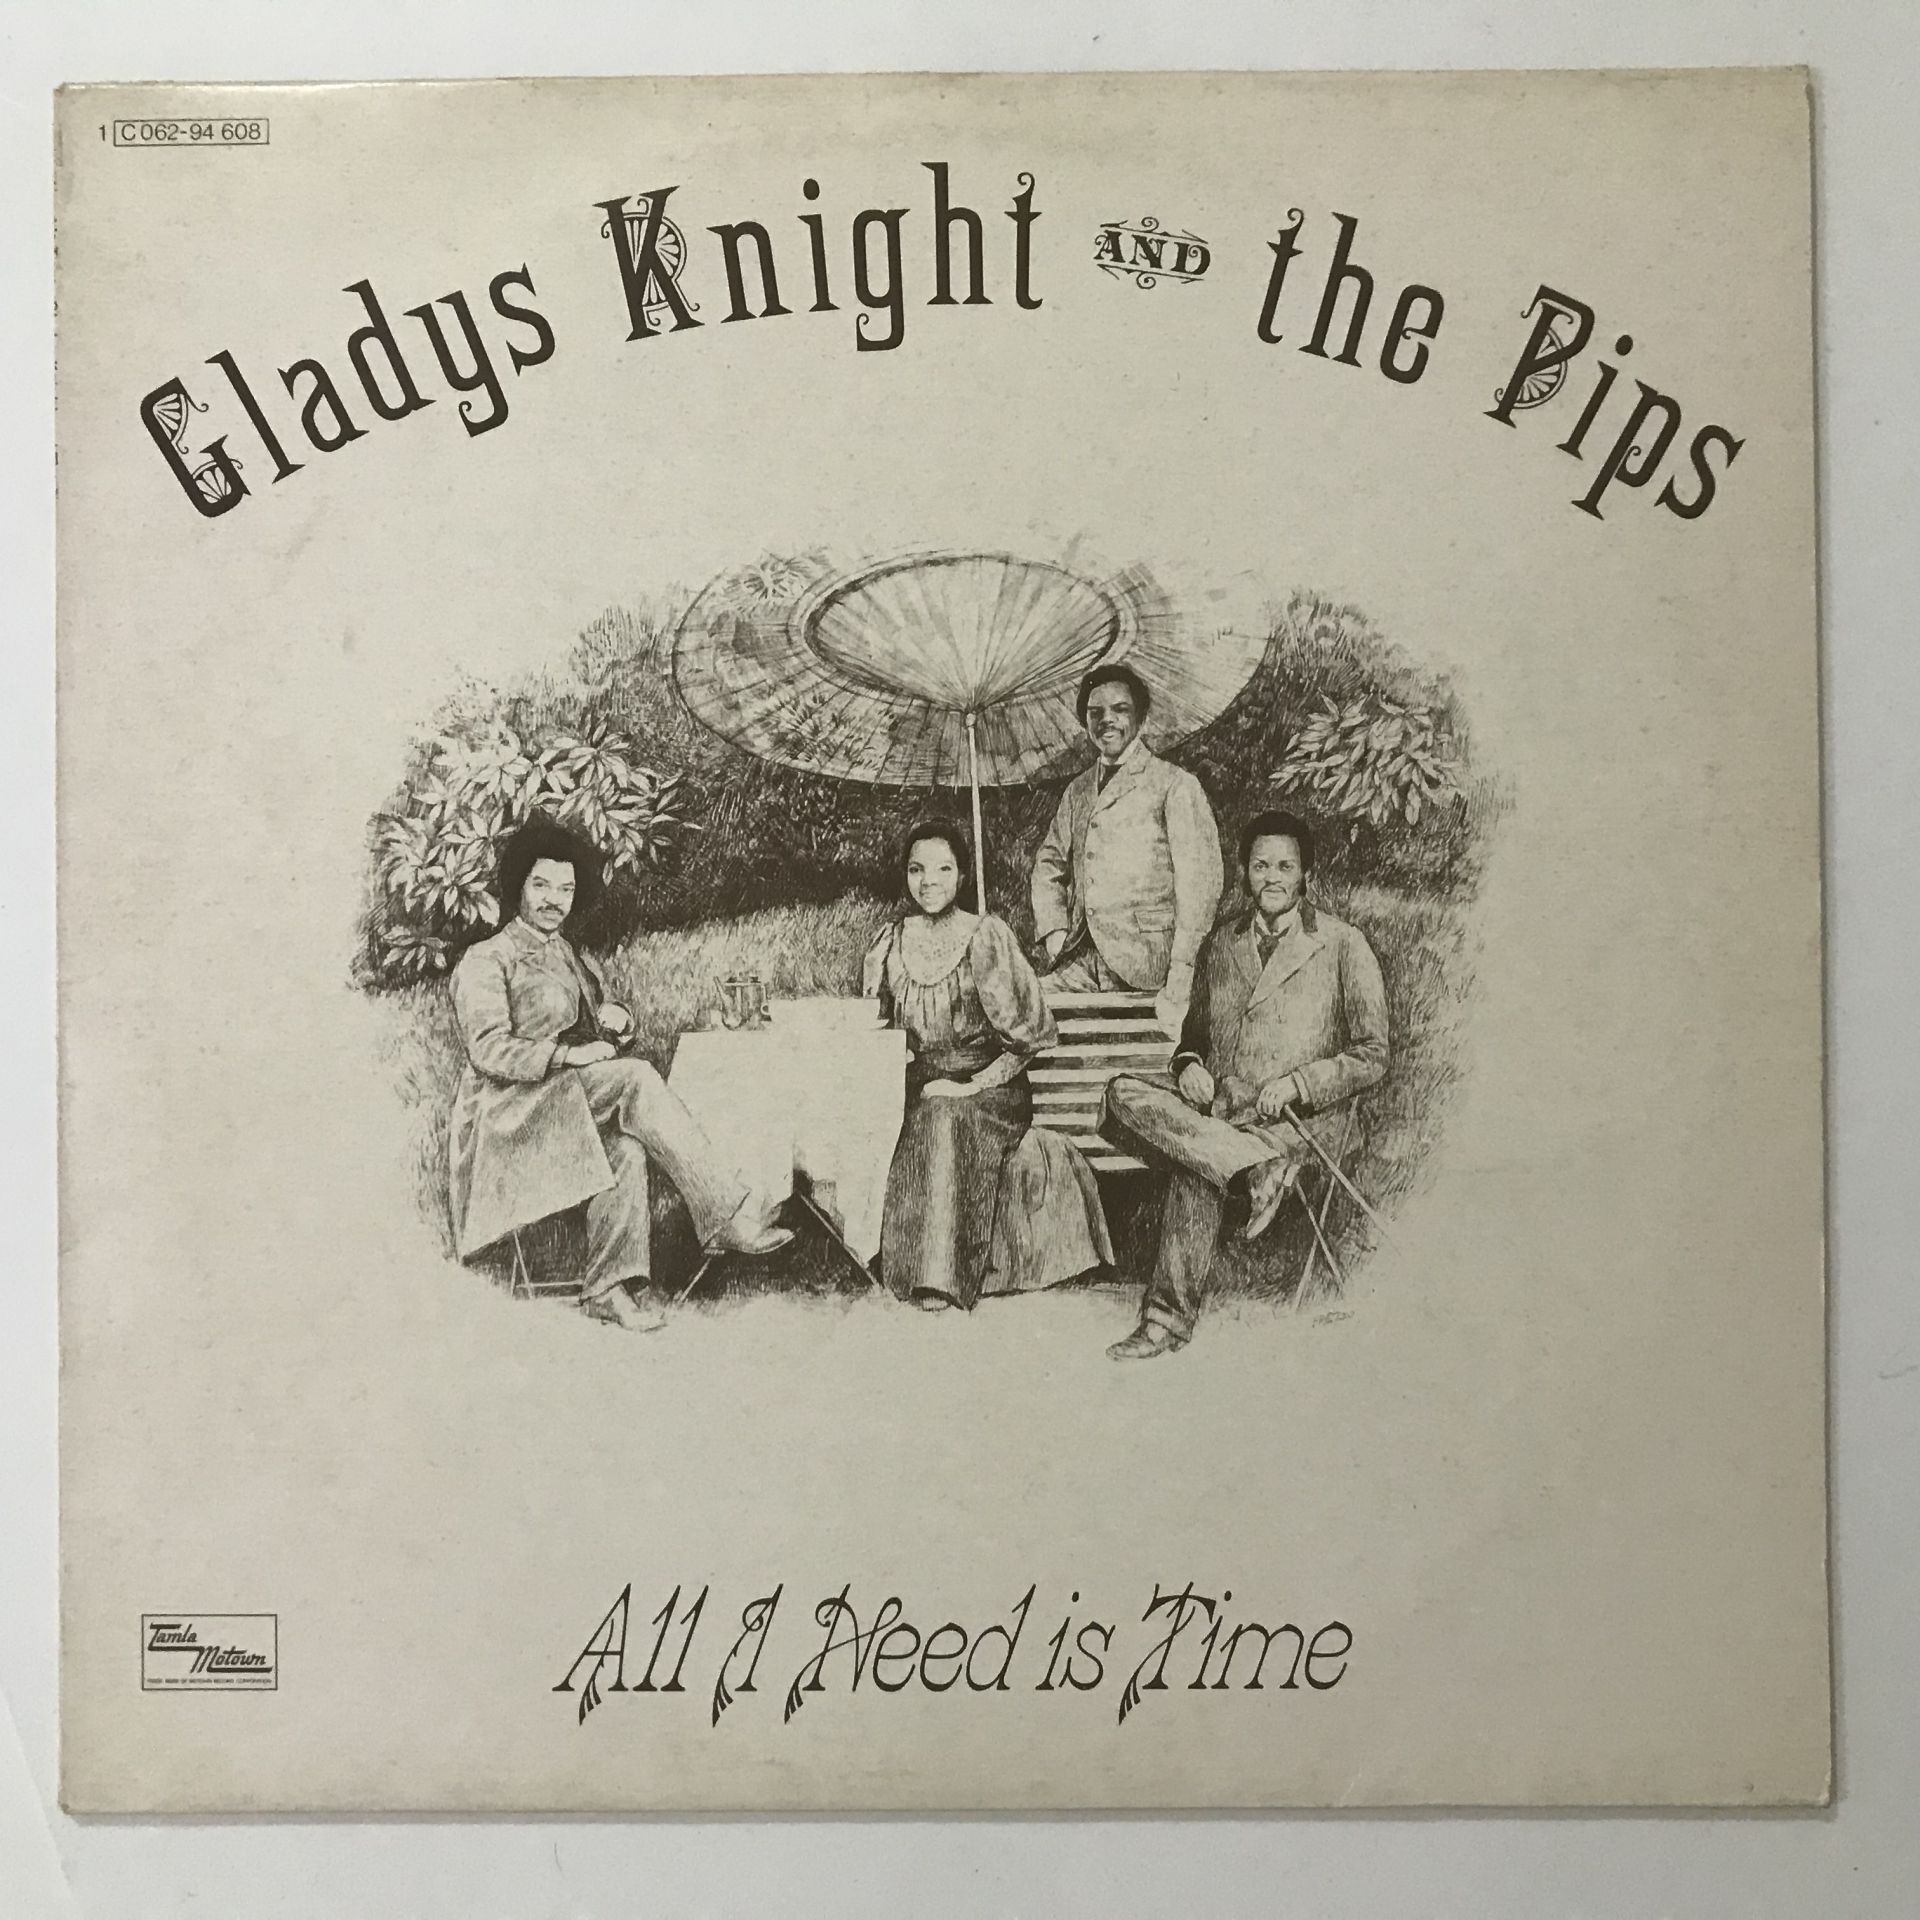 Gladys Knight And The Pips – All I Need Is Time